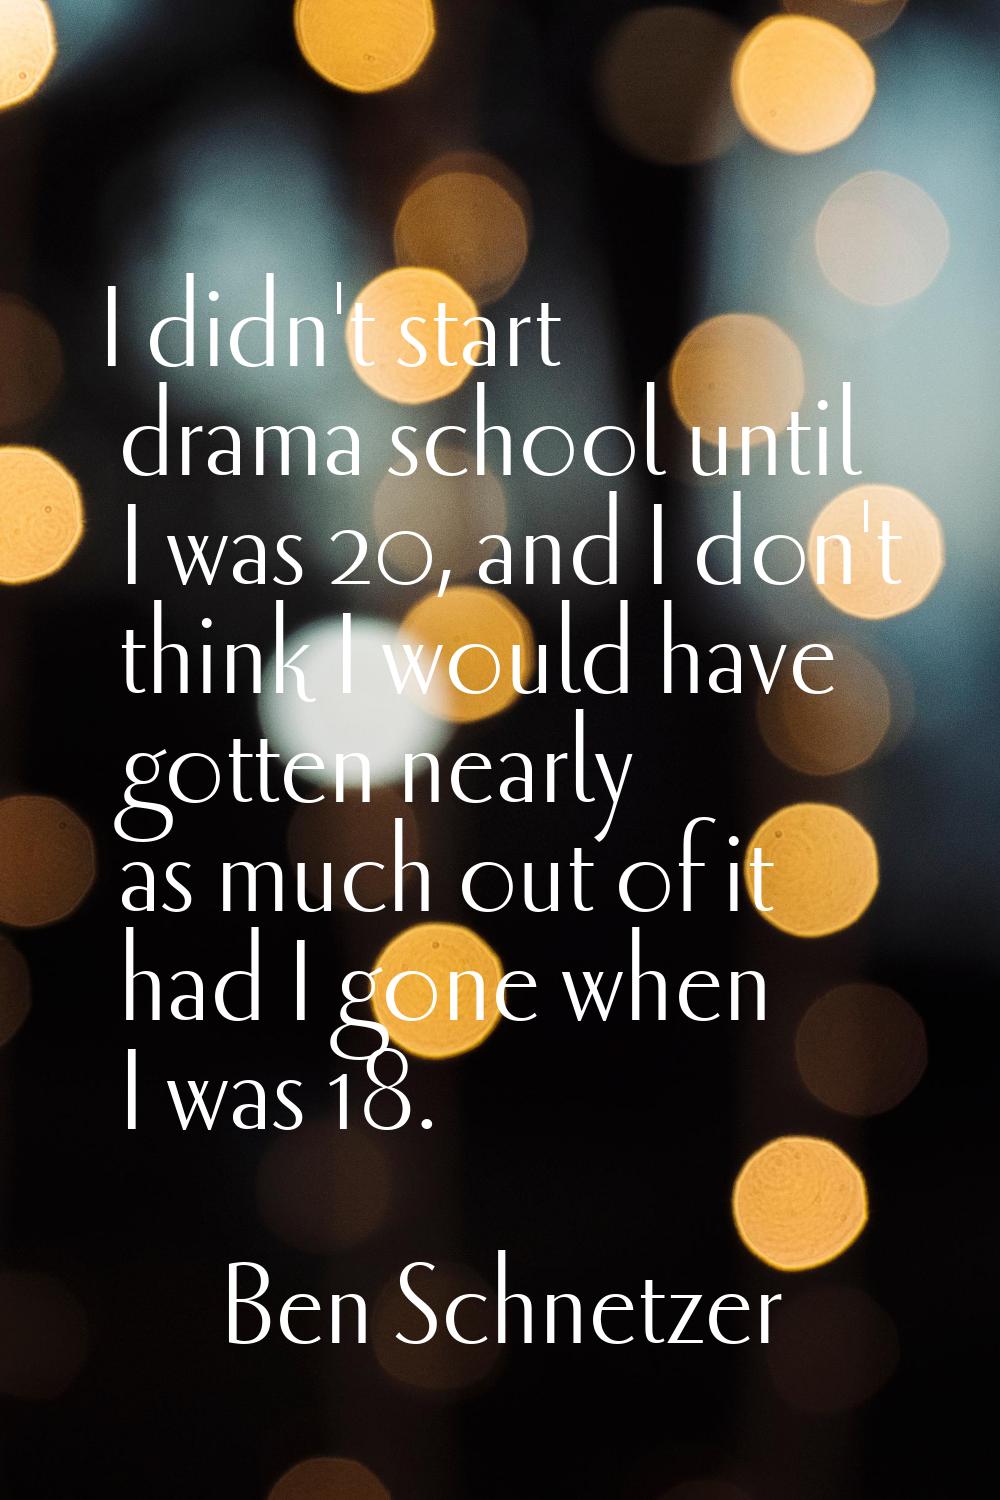 I didn't start drama school until I was 20, and I don't think I would have gotten nearly as much ou